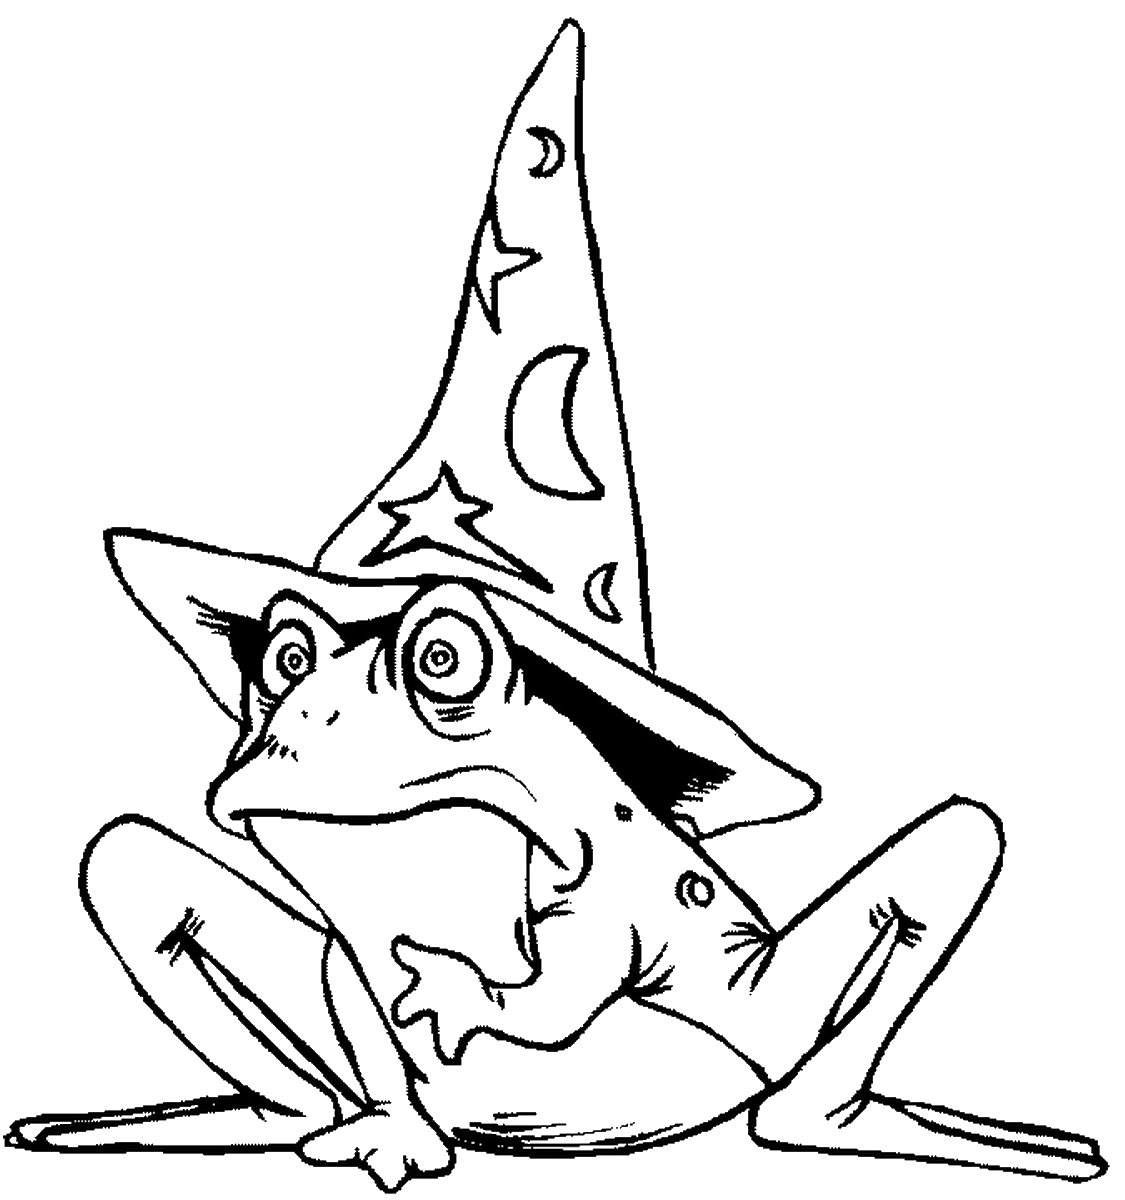 Wizard Magic Frog Coloring Page